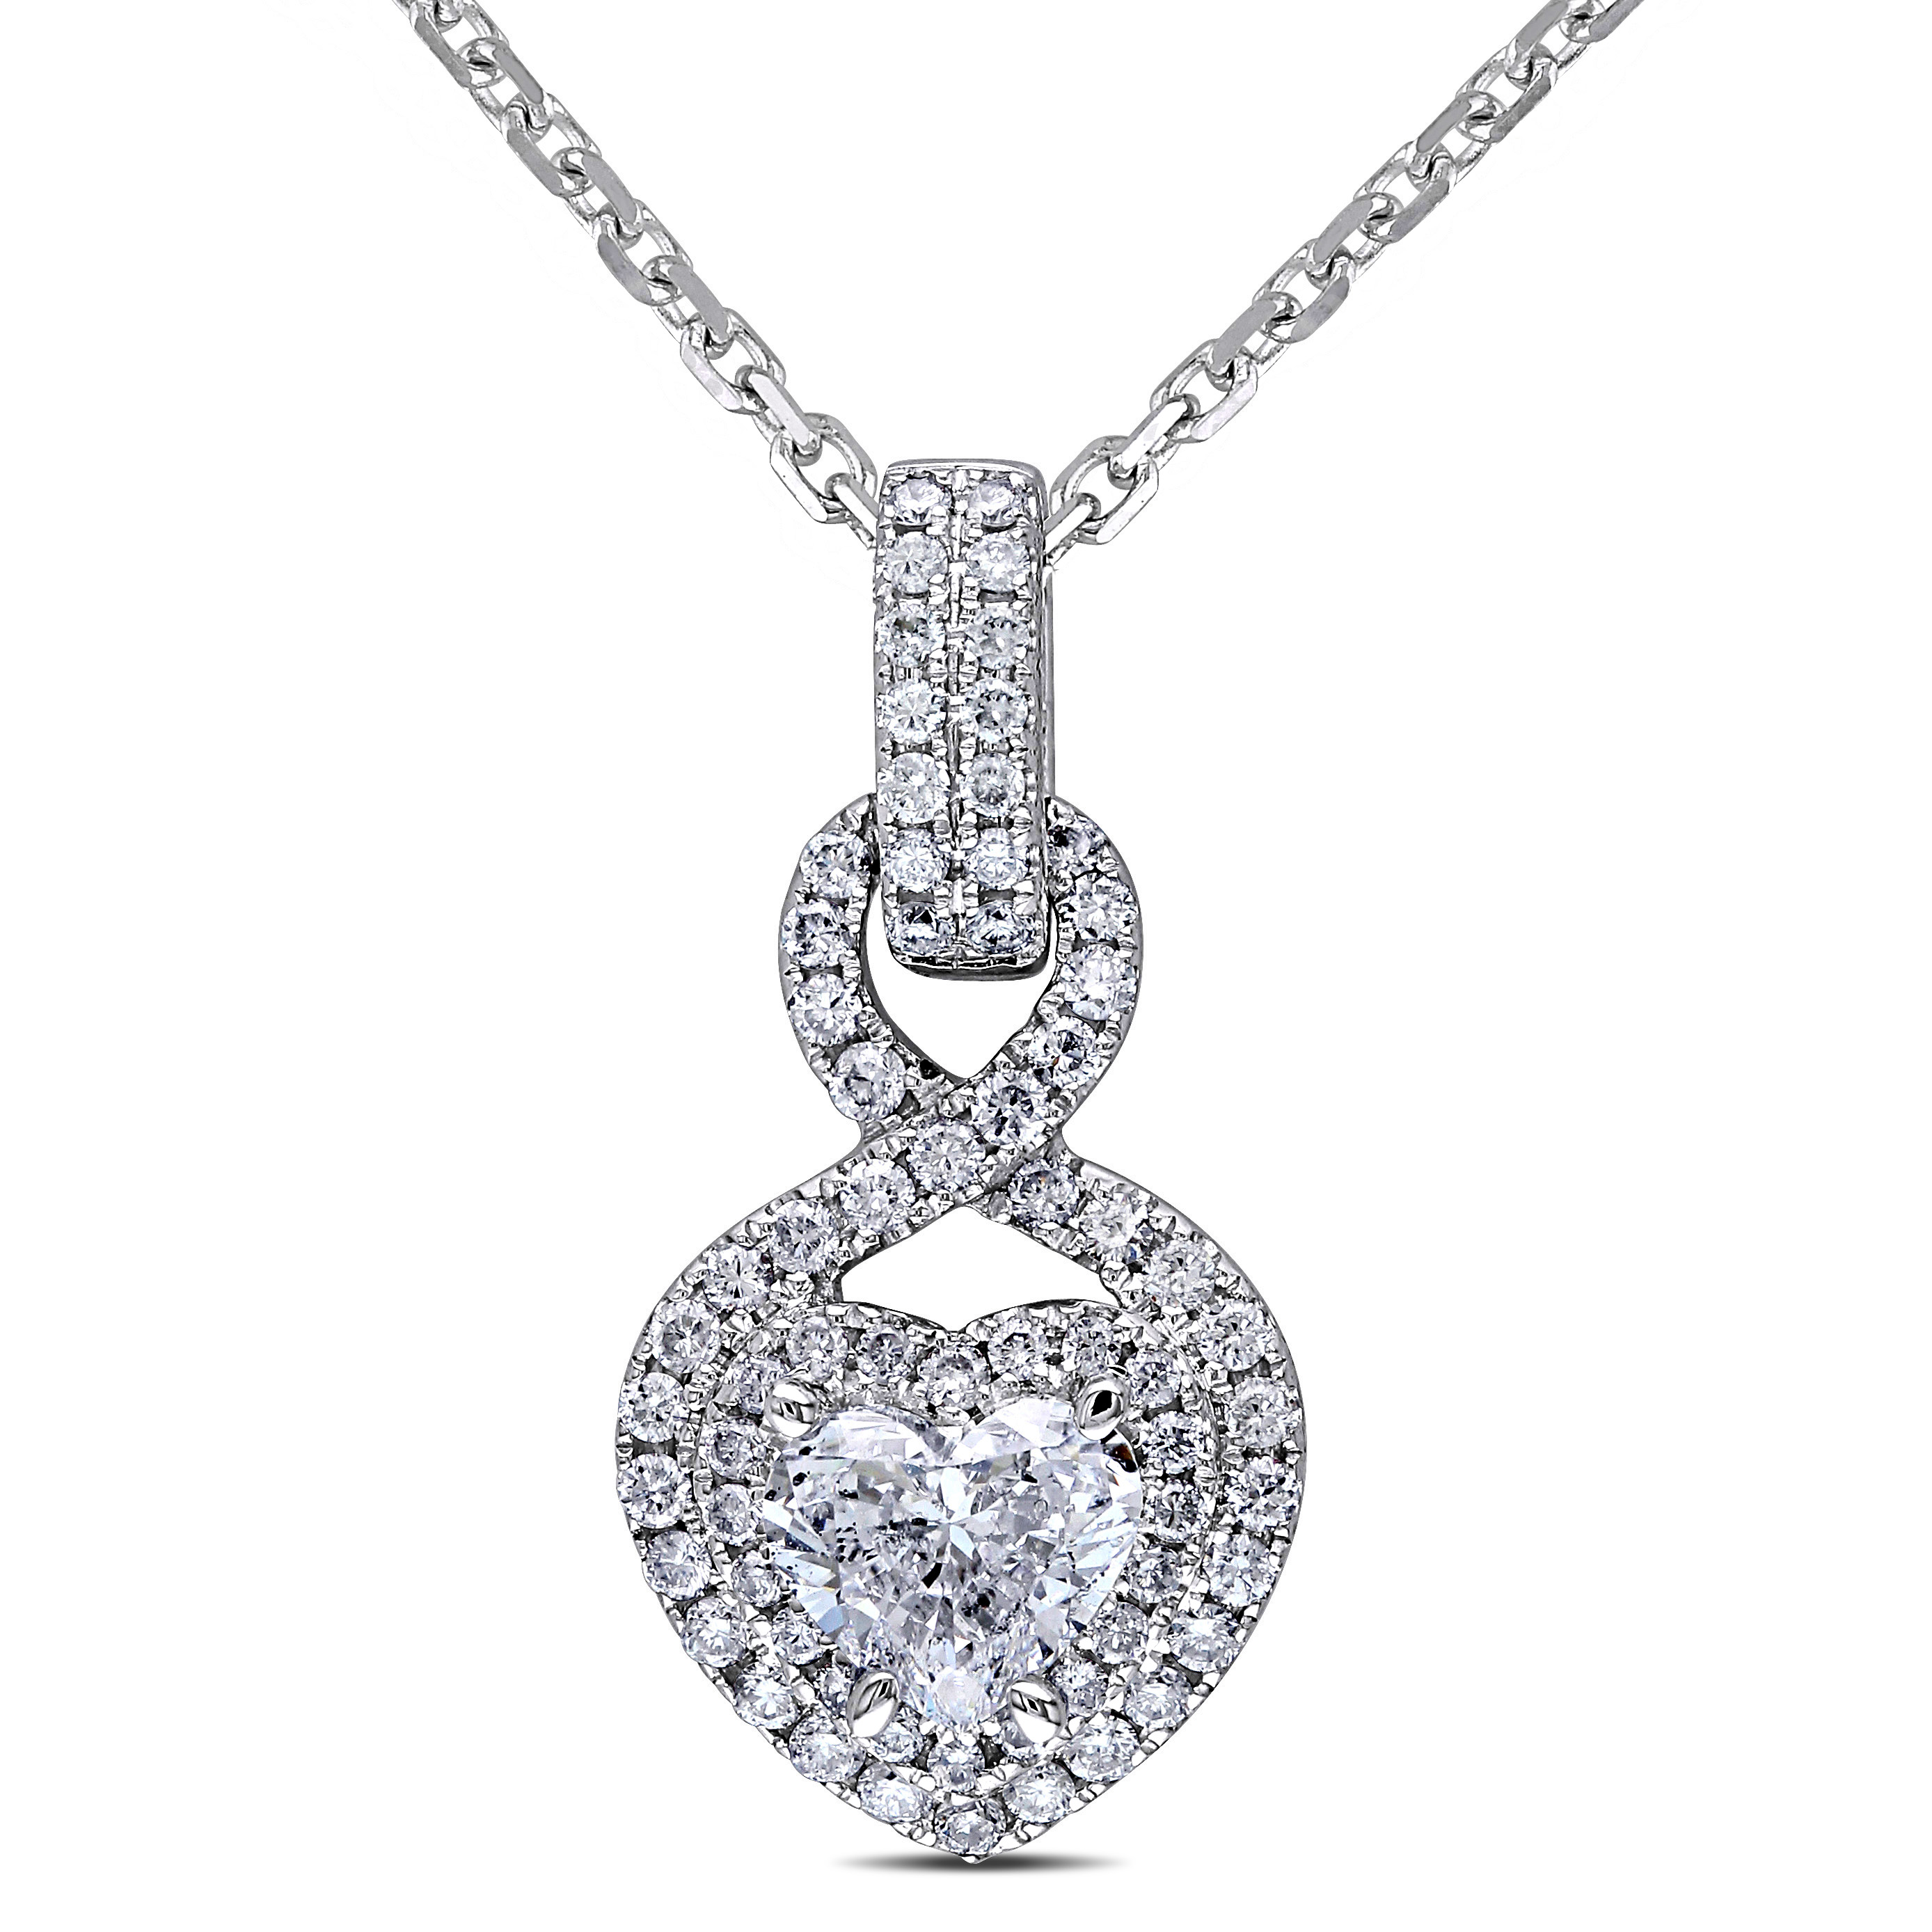 3/4 CT TW Halo Heart Infinity Diamond Pendant with Chain in 14k White Gold - 18 in.